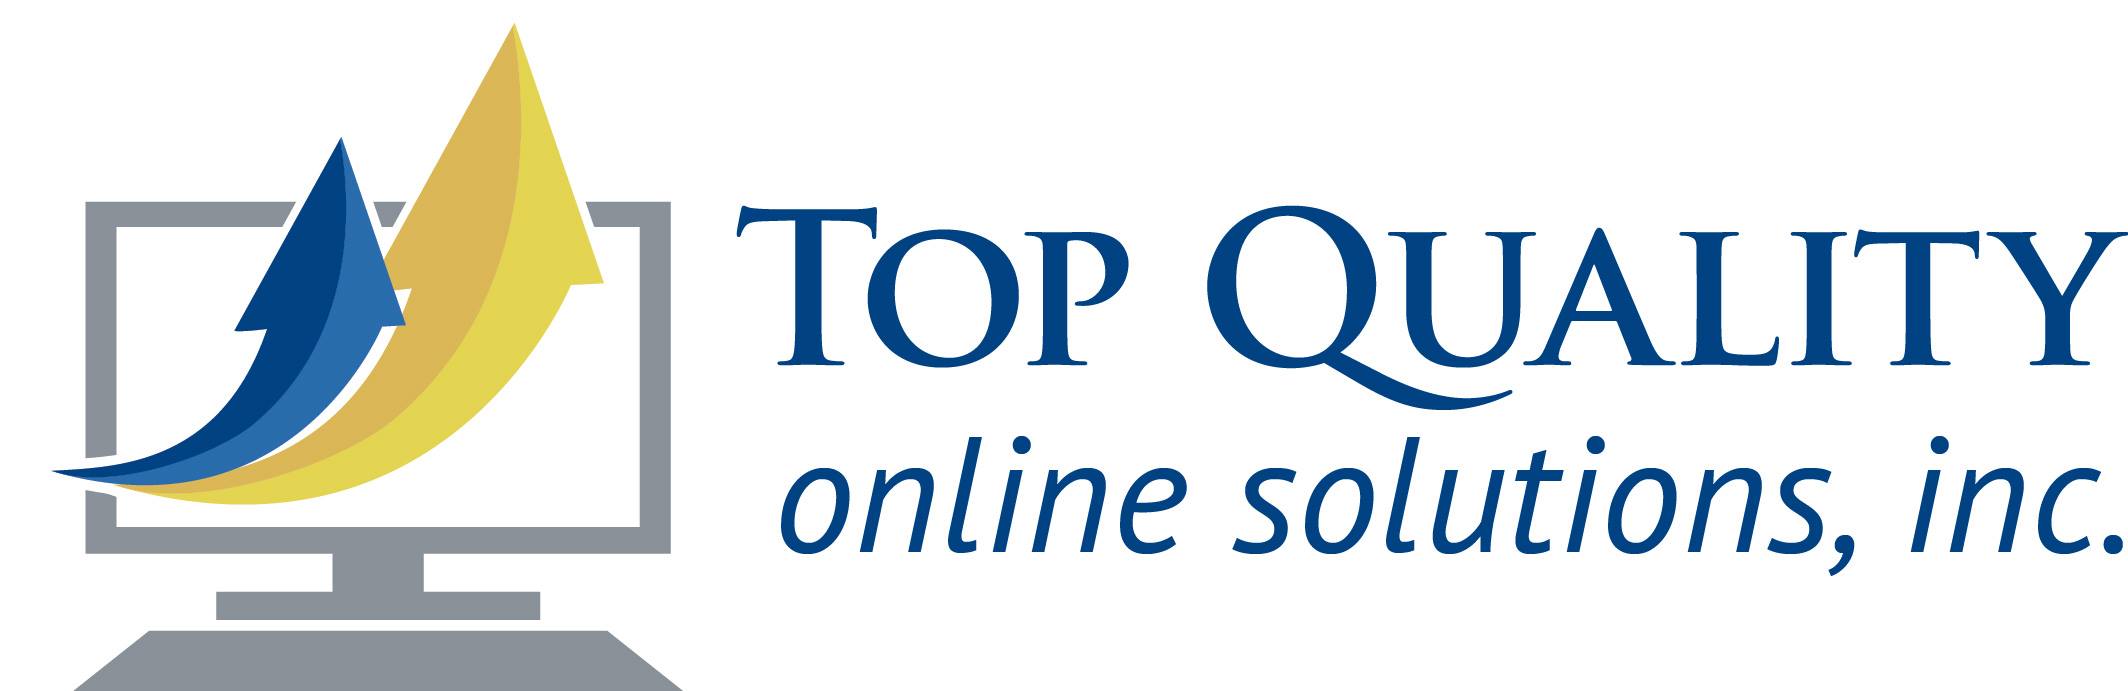 Top Quality Online Solutions, Inc